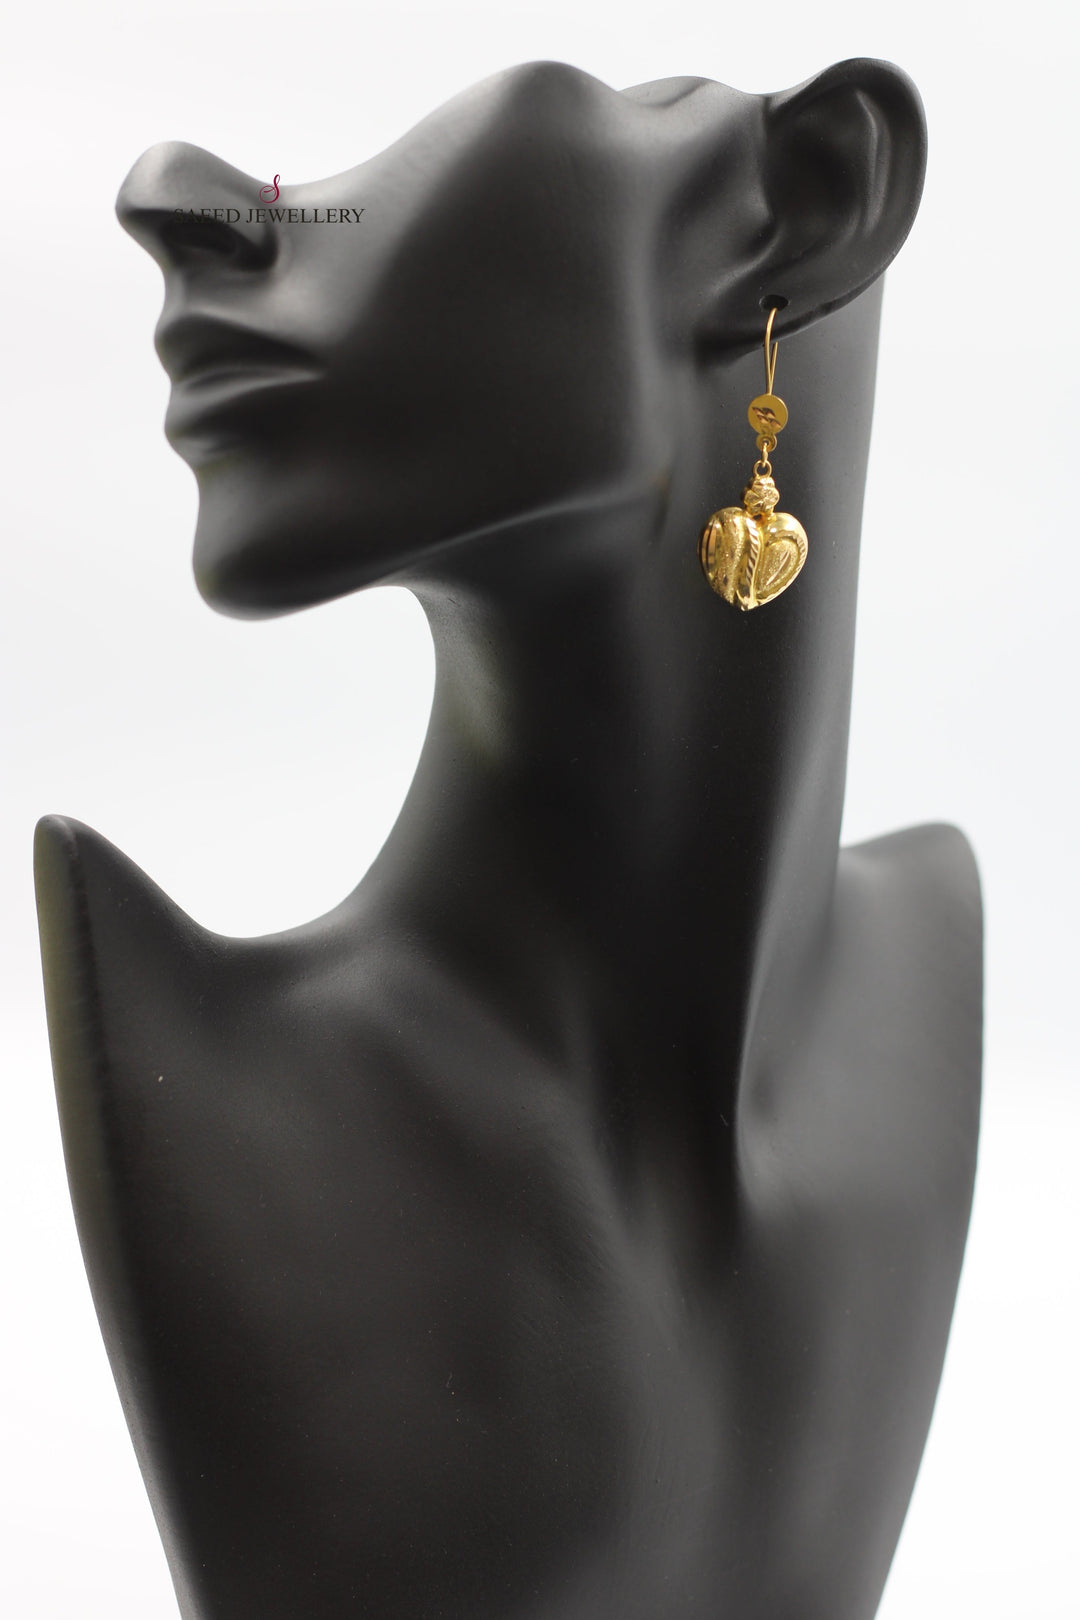 21K Gold Ankletic Earrings by Saeed Jewelry - Image 5